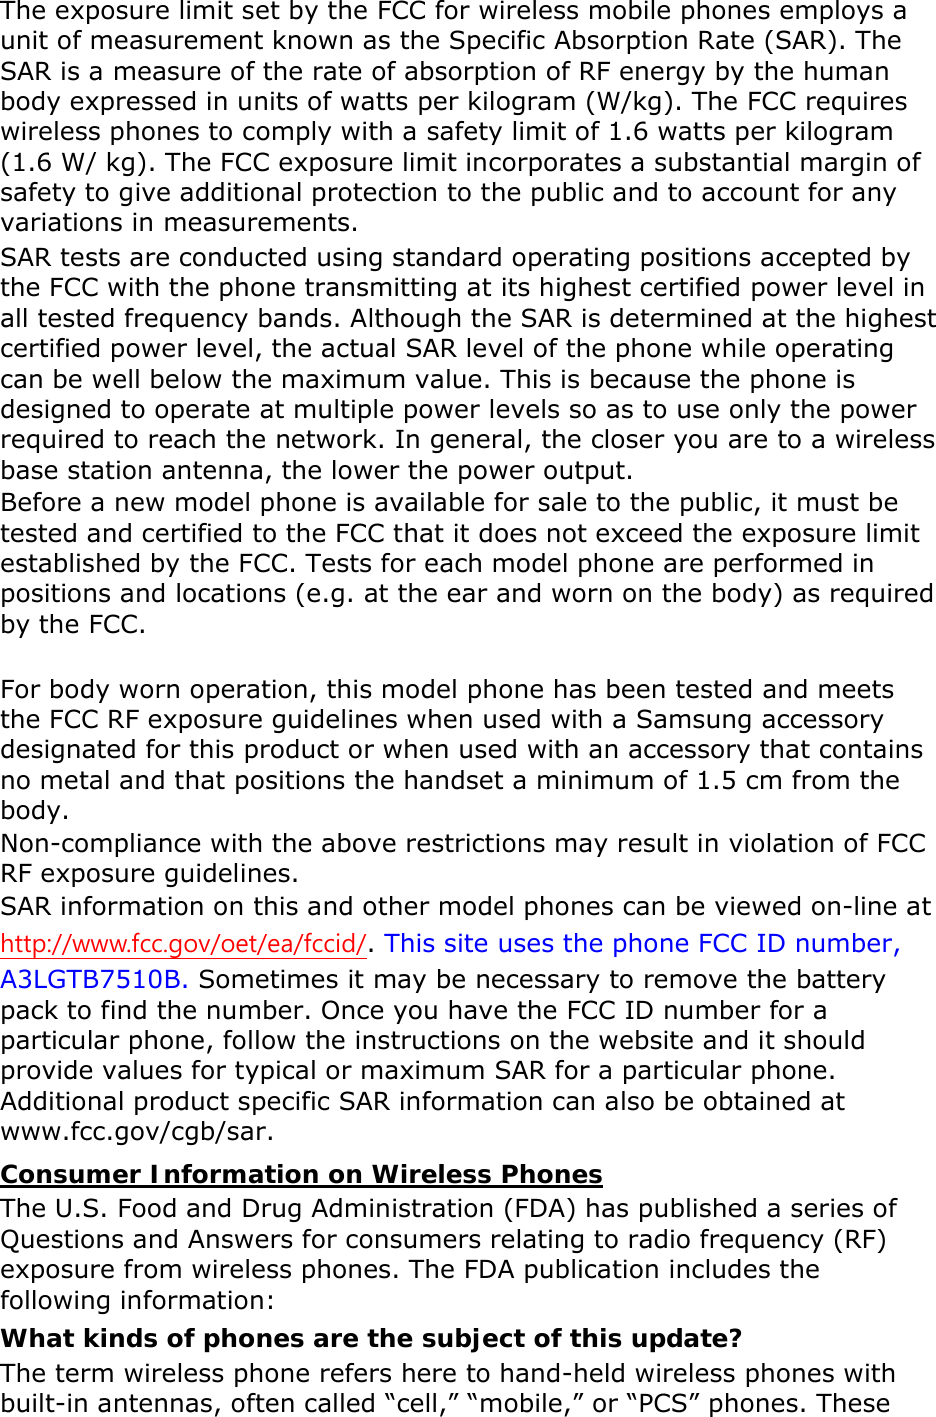 The exposure limit set by the FCC for wireless mobile phones employs a unit of measurement known as the Specific Absorption Rate (SAR). The SAR is a measure of the rate of absorption of RF energy by the human body expressed in units of watts per kilogram (W/kg). The FCC requires wireless phones to comply with a safety limit of 1.6 watts per kilogram (1.6 W/ kg). The FCC exposure limit incorporates a substantial margin of safety to give additional protection to the public and to account for any variations in measurements. SAR tests are conducted using standard operating positions accepted by the FCC with the phone transmitting at its highest certified power level in all tested frequency bands. Although the SAR is determined at the highest certified power level, the actual SAR level of the phone while operating can be well below the maximum value. This is because the phone is designed to operate at multiple power levels so as to use only the power required to reach the network. In general, the closer you are to a wireless base station antenna, the lower the power output. Before a new model phone is available for sale to the public, it must be tested and certified to the FCC that it does not exceed the exposure limit established by the FCC. Tests for each model phone are performed in positions and locations (e.g. at the ear and worn on the body) as required by the FCC.      For body worn operation, this model phone has been tested and meets the FCC RF exposure guidelines when used with a Samsung accessory designated for this product or when used with an accessory that contains no metal and that positions the handset a minimum of 1.5 cm from the body.   Non-compliance with the above restrictions may result in violation of FCC RF exposure guidelines. SAR information on this and other model phones can be viewed on-line at http://www.fcc.gov/oet/ea/fccid/. This site uses the phone FCC ID number, A3LGTB7510B. Sometimes it may be necessary to remove the battery pack to find the number. Once you have the FCC ID number for a particular phone, follow the instructions on the website and it should provide values for typical or maximum SAR for a particular phone. Additional product specific SAR information can also be obtained at www.fcc.gov/cgb/sar. Consumer Information on Wireless Phones The U.S. Food and Drug Administration (FDA) has published a series of Questions and Answers for consumers relating to radio frequency (RF) exposure from wireless phones. The FDA publication includes the following information: What kinds of phones are the subject of this update? The term wireless phone refers here to hand-held wireless phones with built-in antennas, often called “cell,” “mobile,” or “PCS” phones. These 